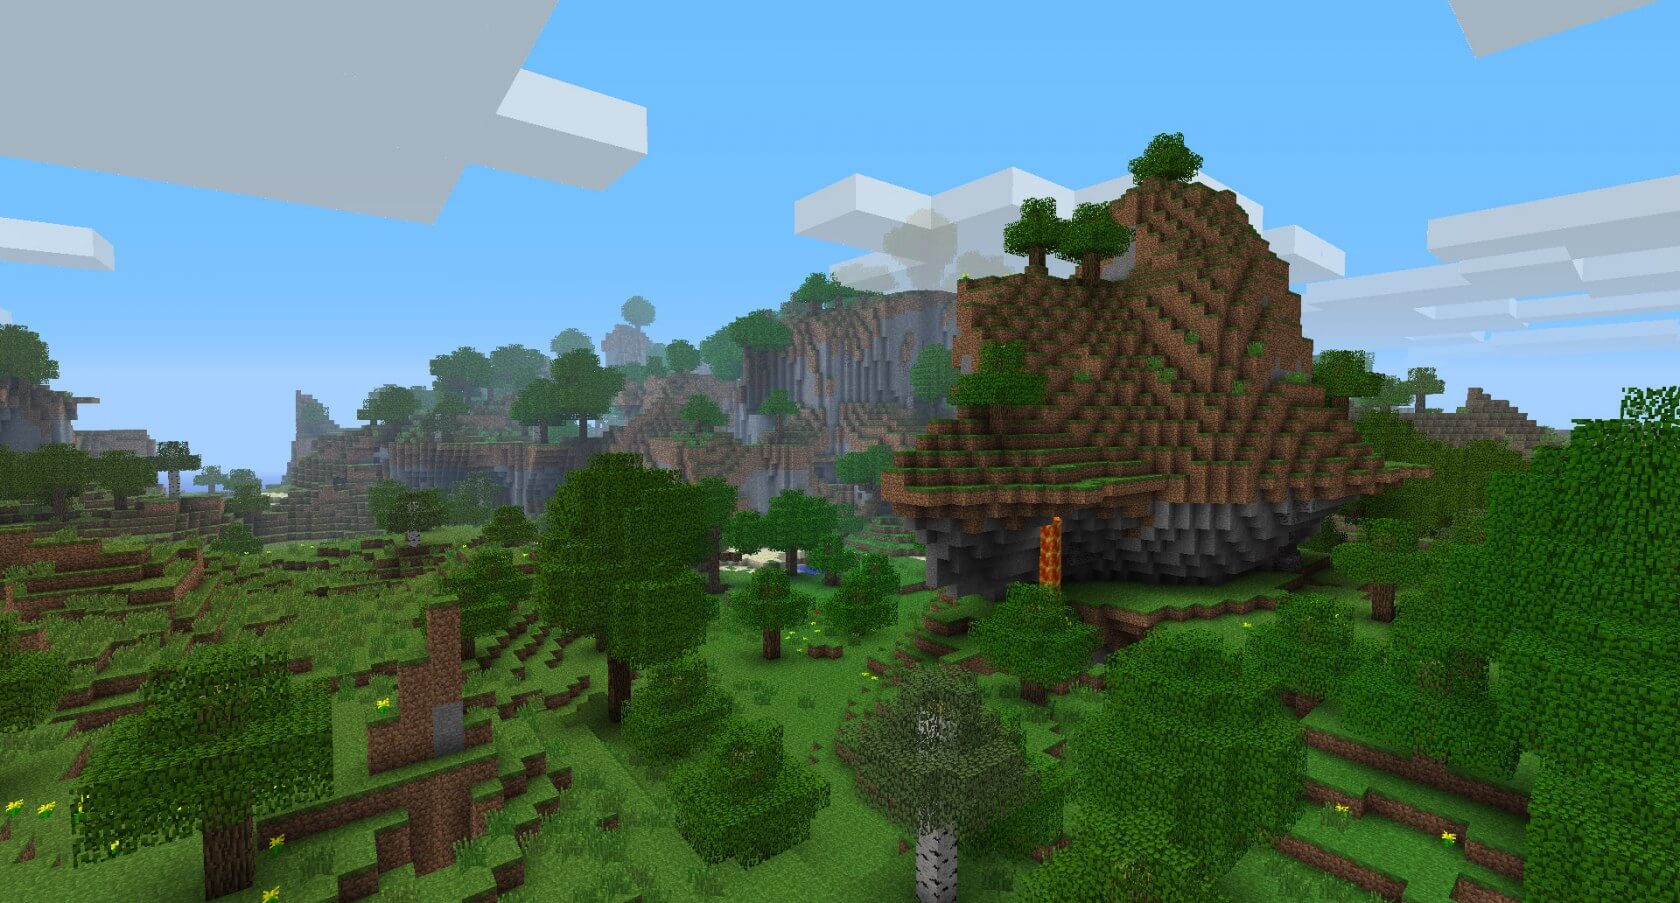 Minecraft drops support for Xbox 360, PS3, and Wii U versions